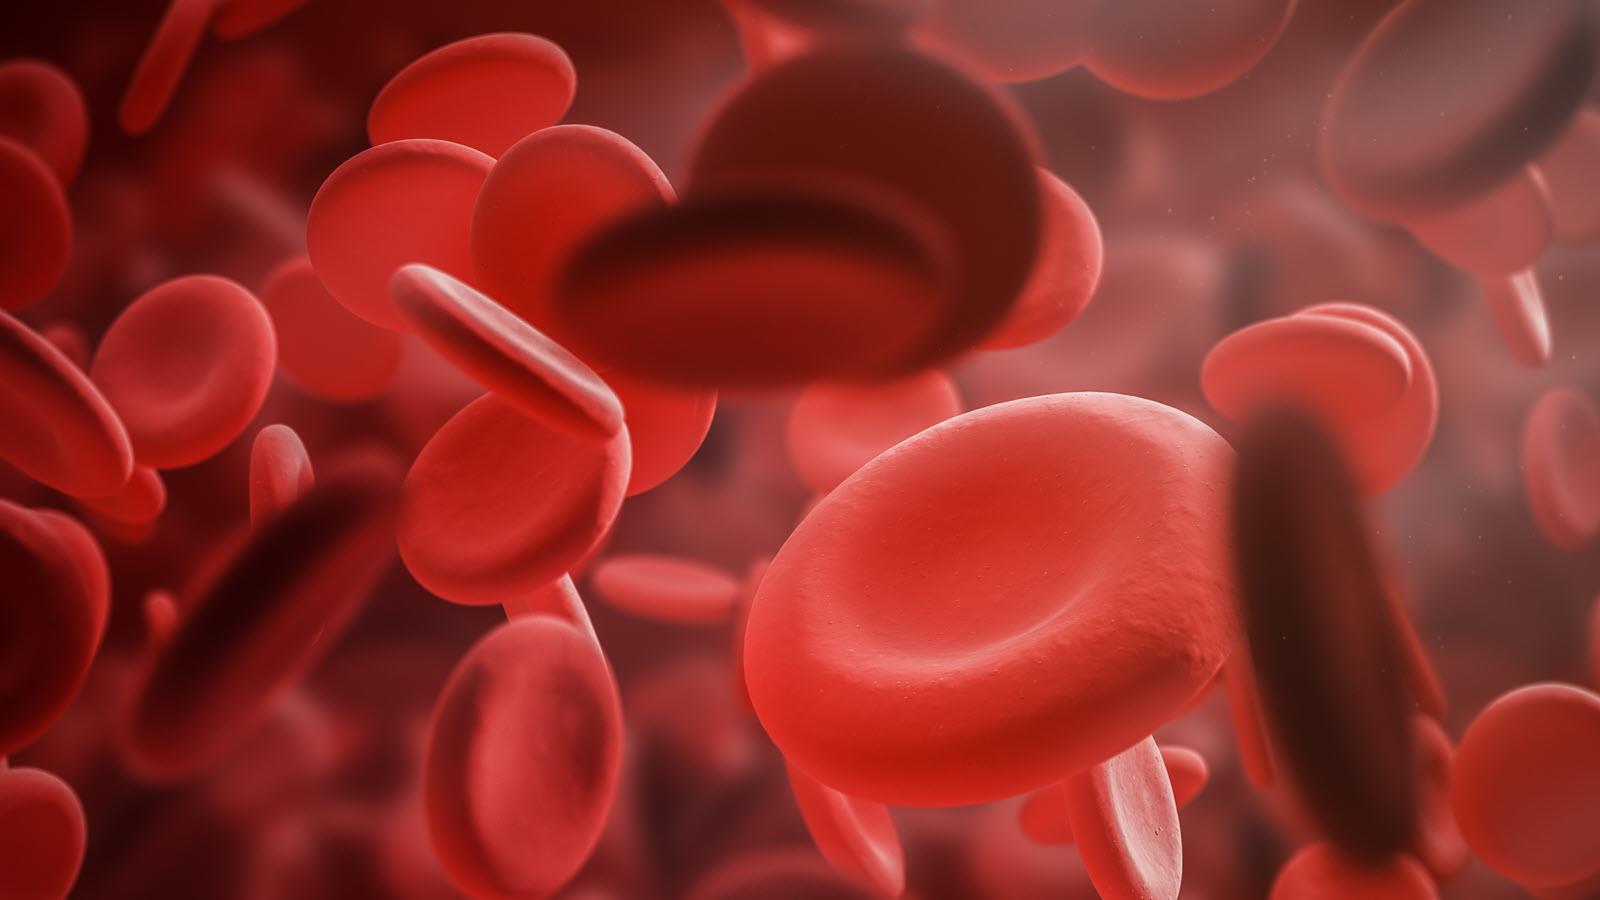 red blood cells with characteristic donut shape